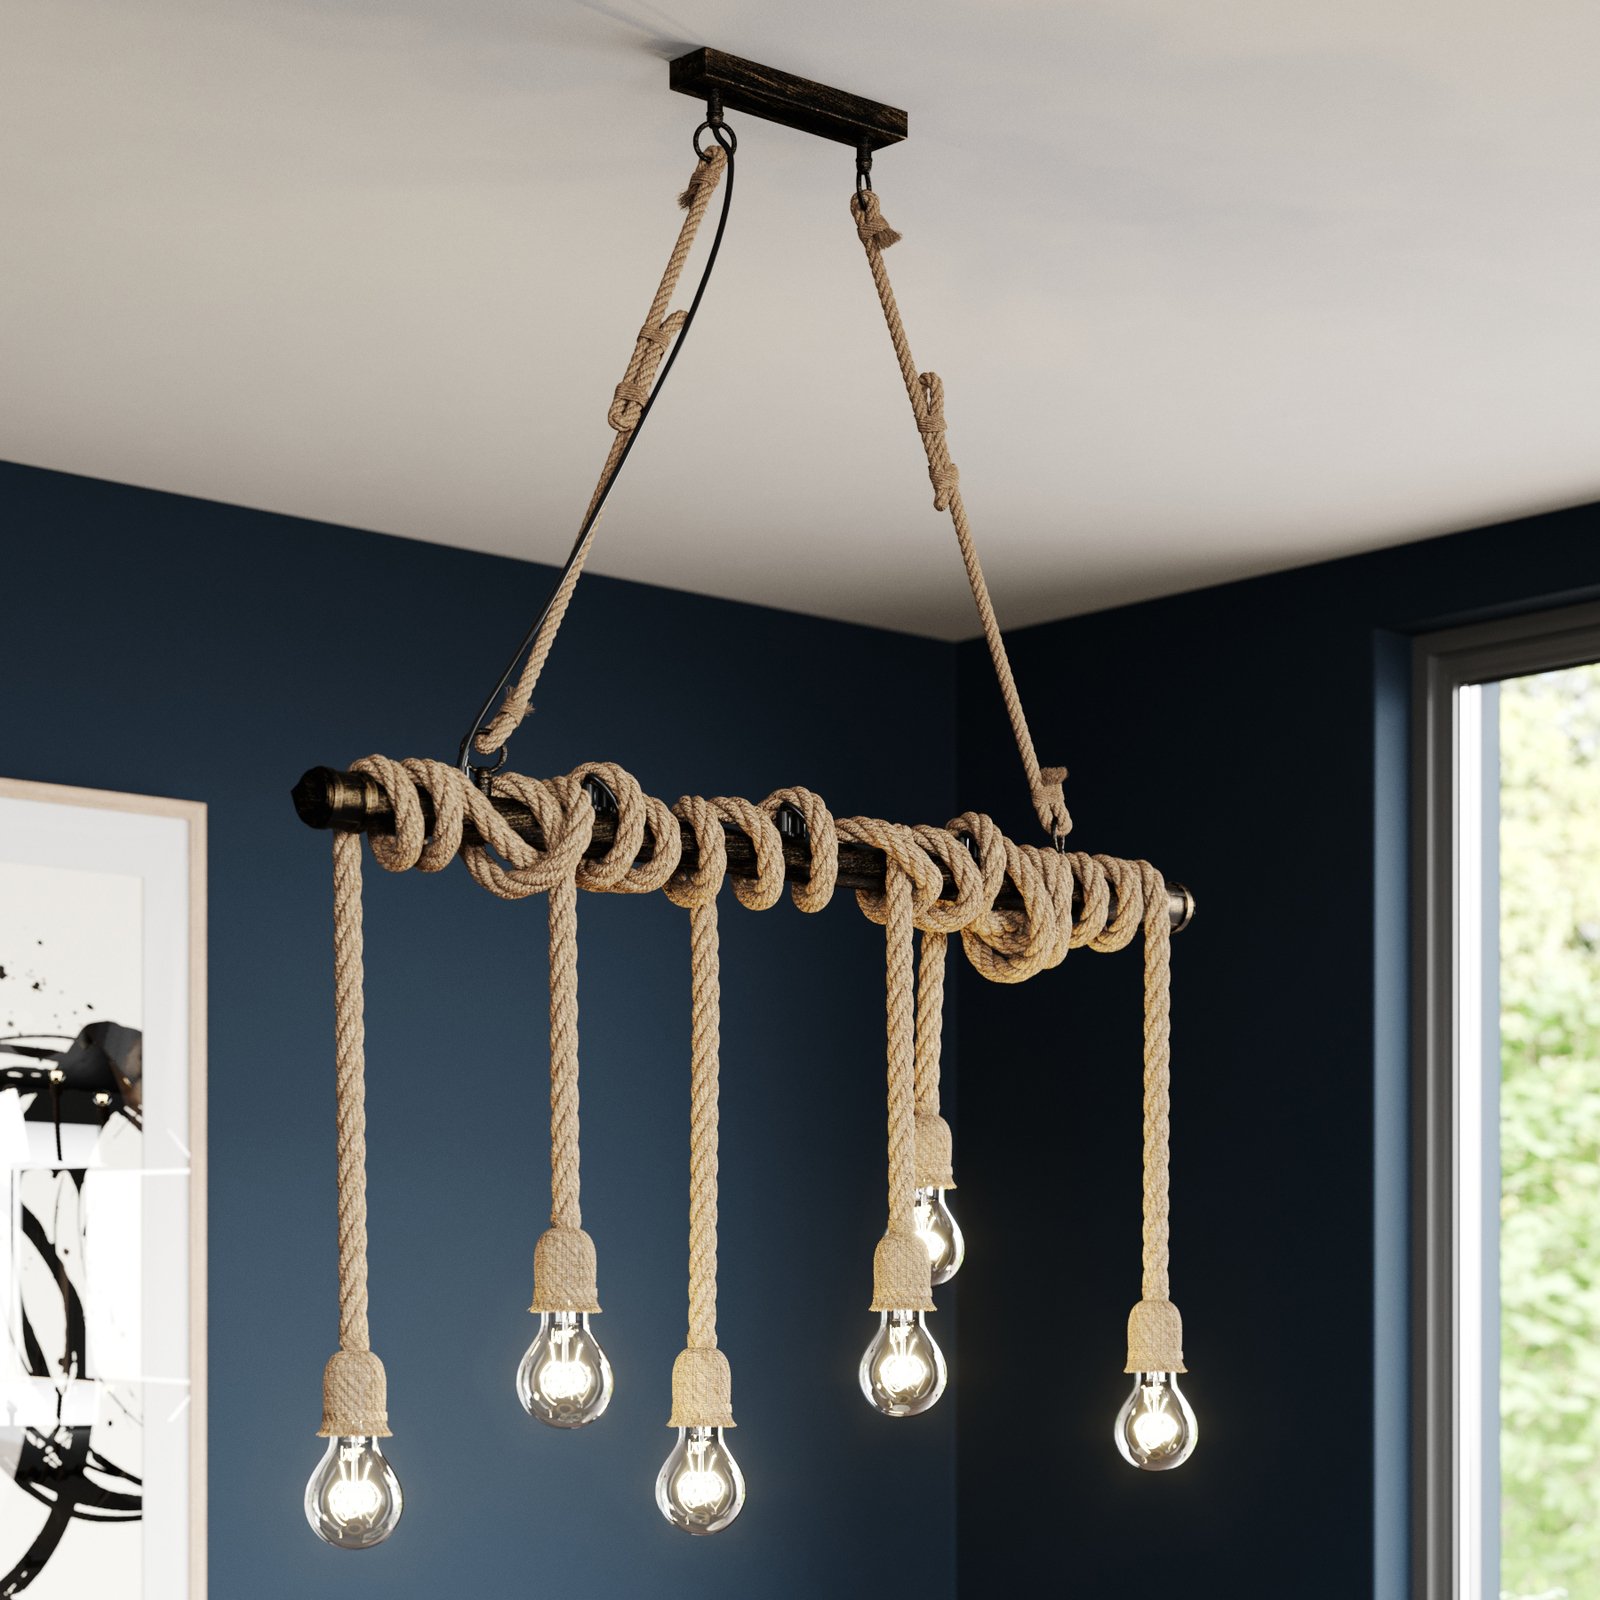 Ja levend Thermisch Lindby Hajo hanglamp, 6-lamps, touw | Lampen24.be